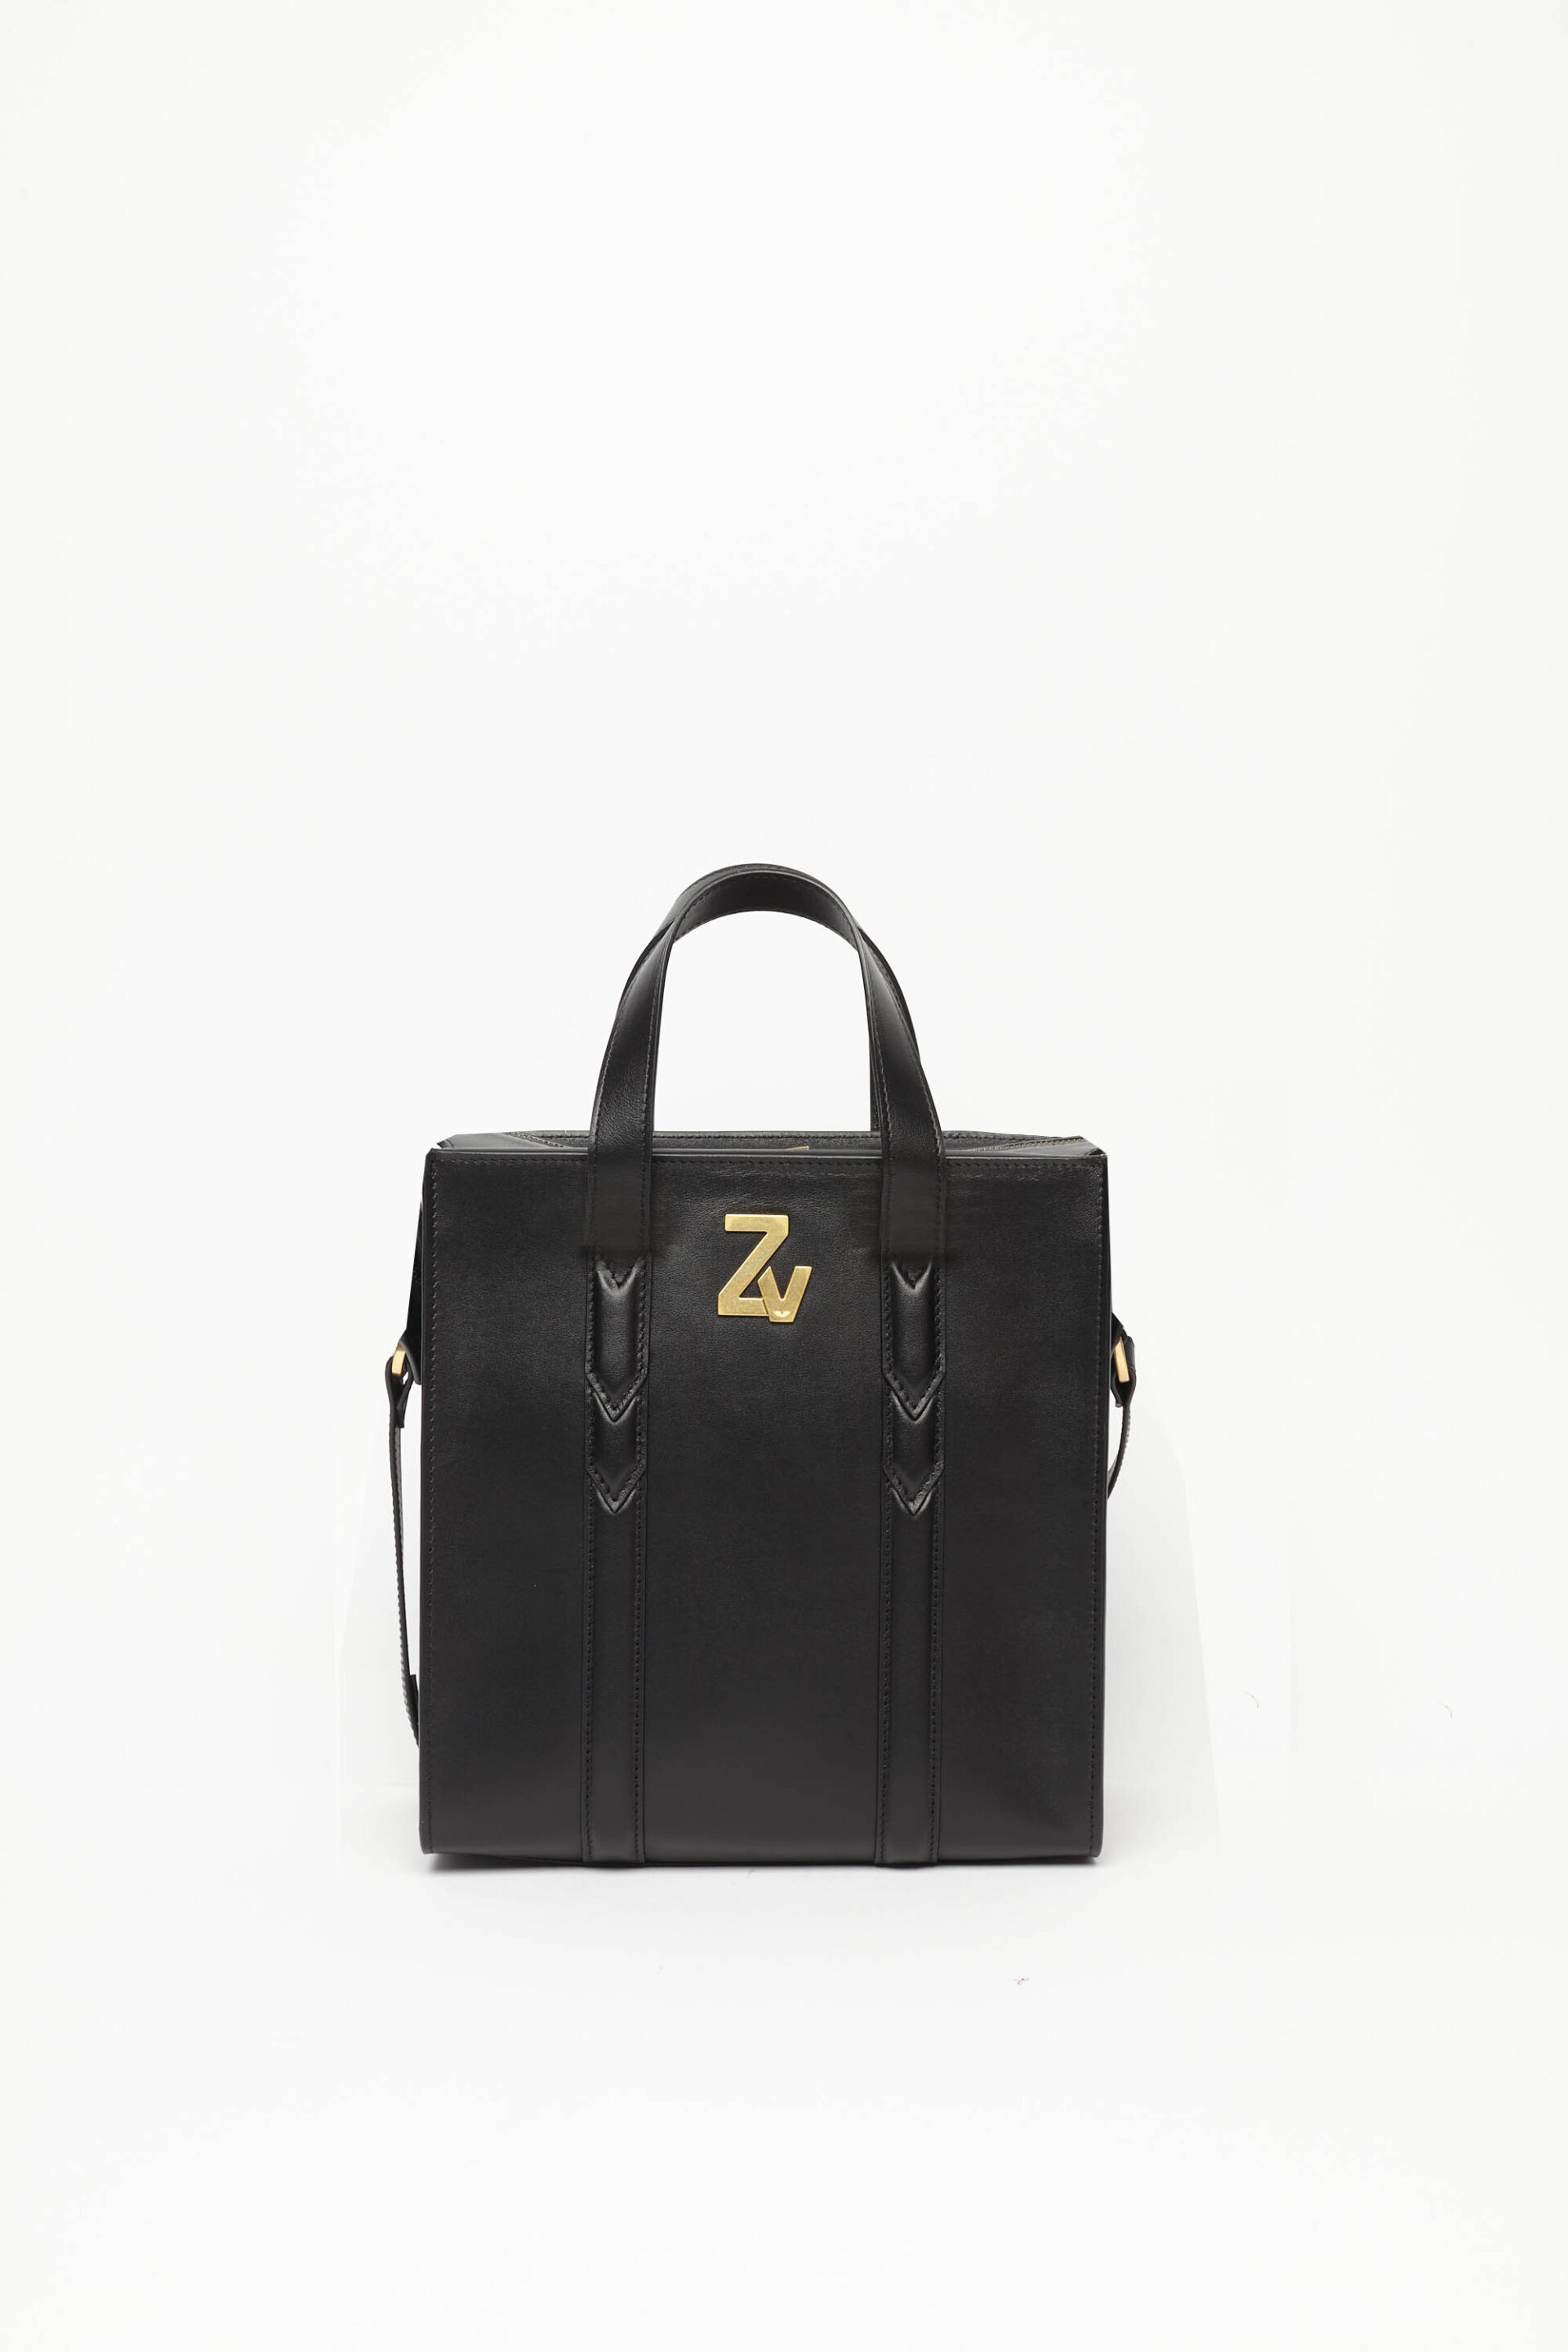 Zadig & Voltaire - GIFT! Tote Bag